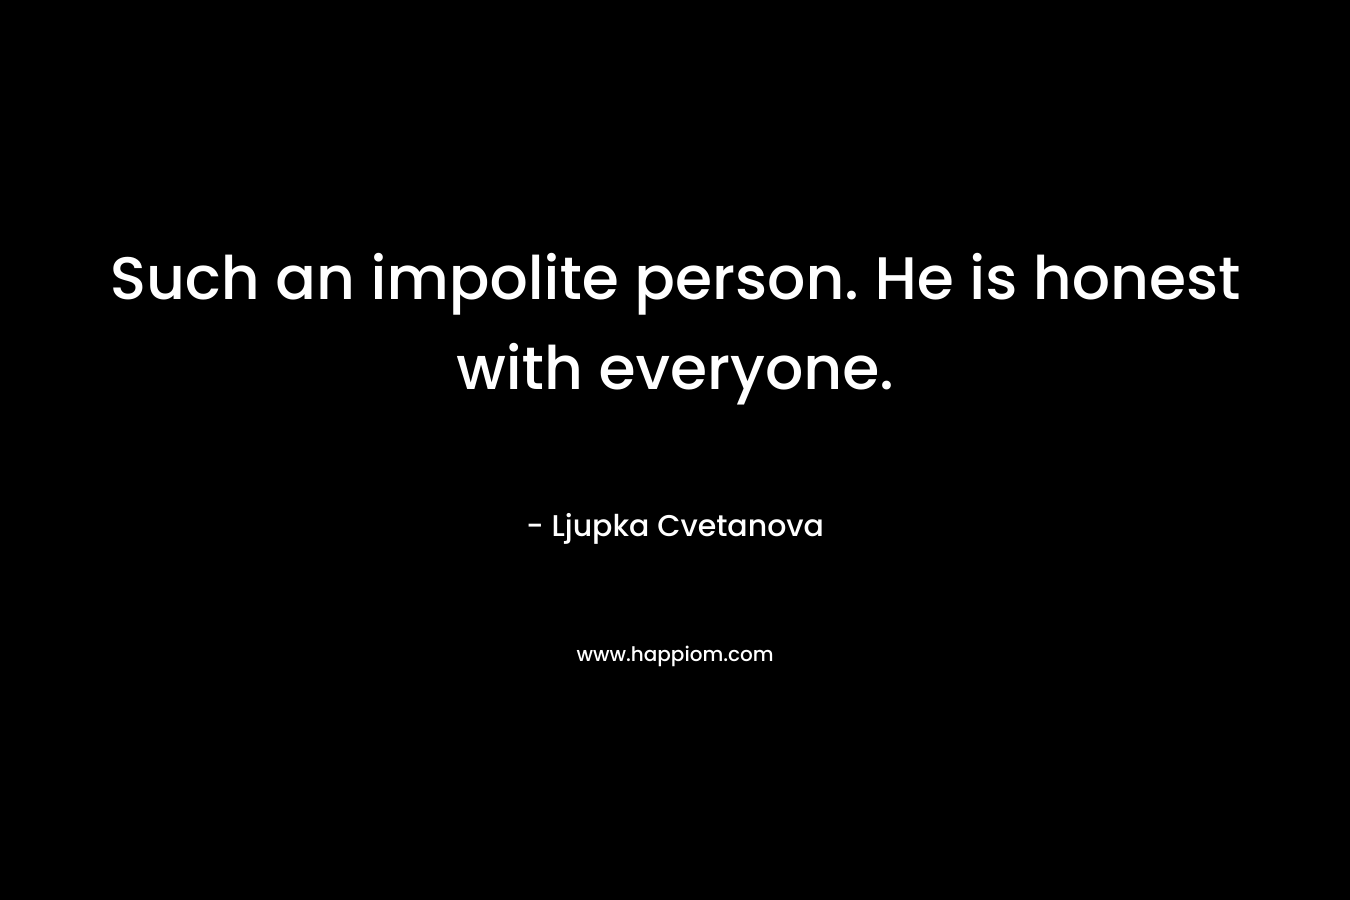 Such an impolite person. He is honest with everyone. – Ljupka Cvetanova